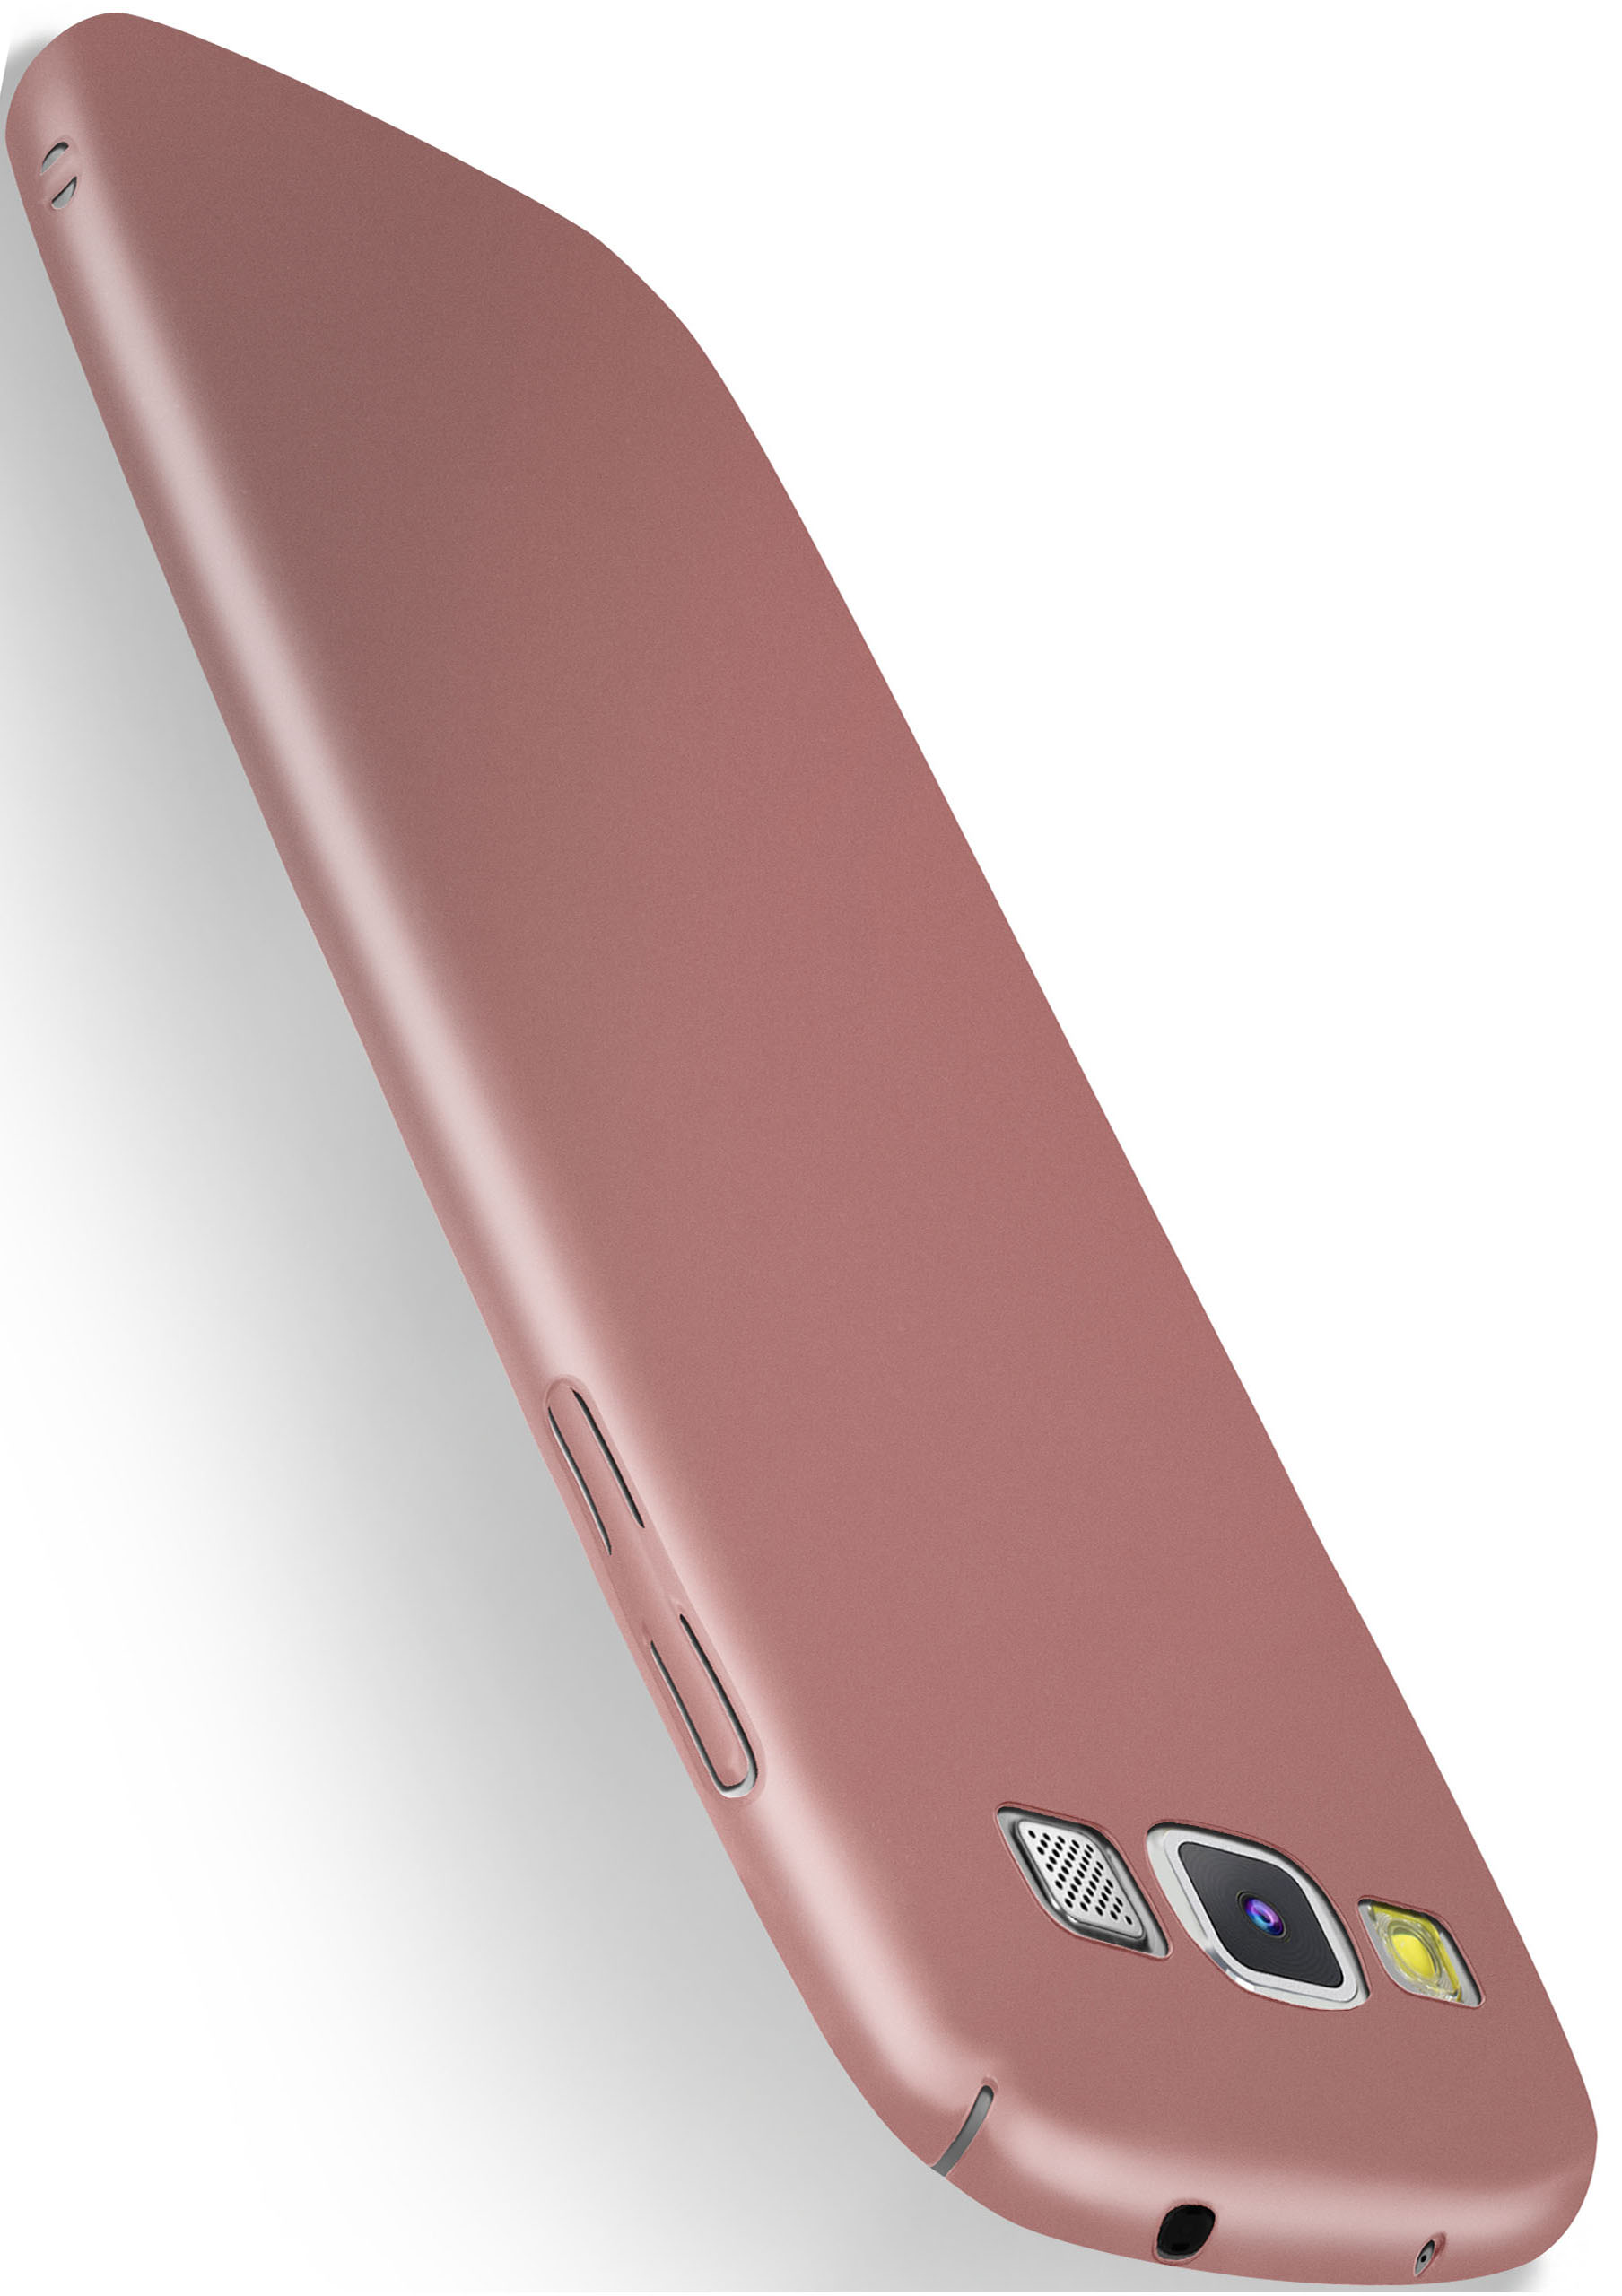 MOEX Alpha Case, Rose Neo, / Galaxy S3 Backcover, Gold Samsung, S3